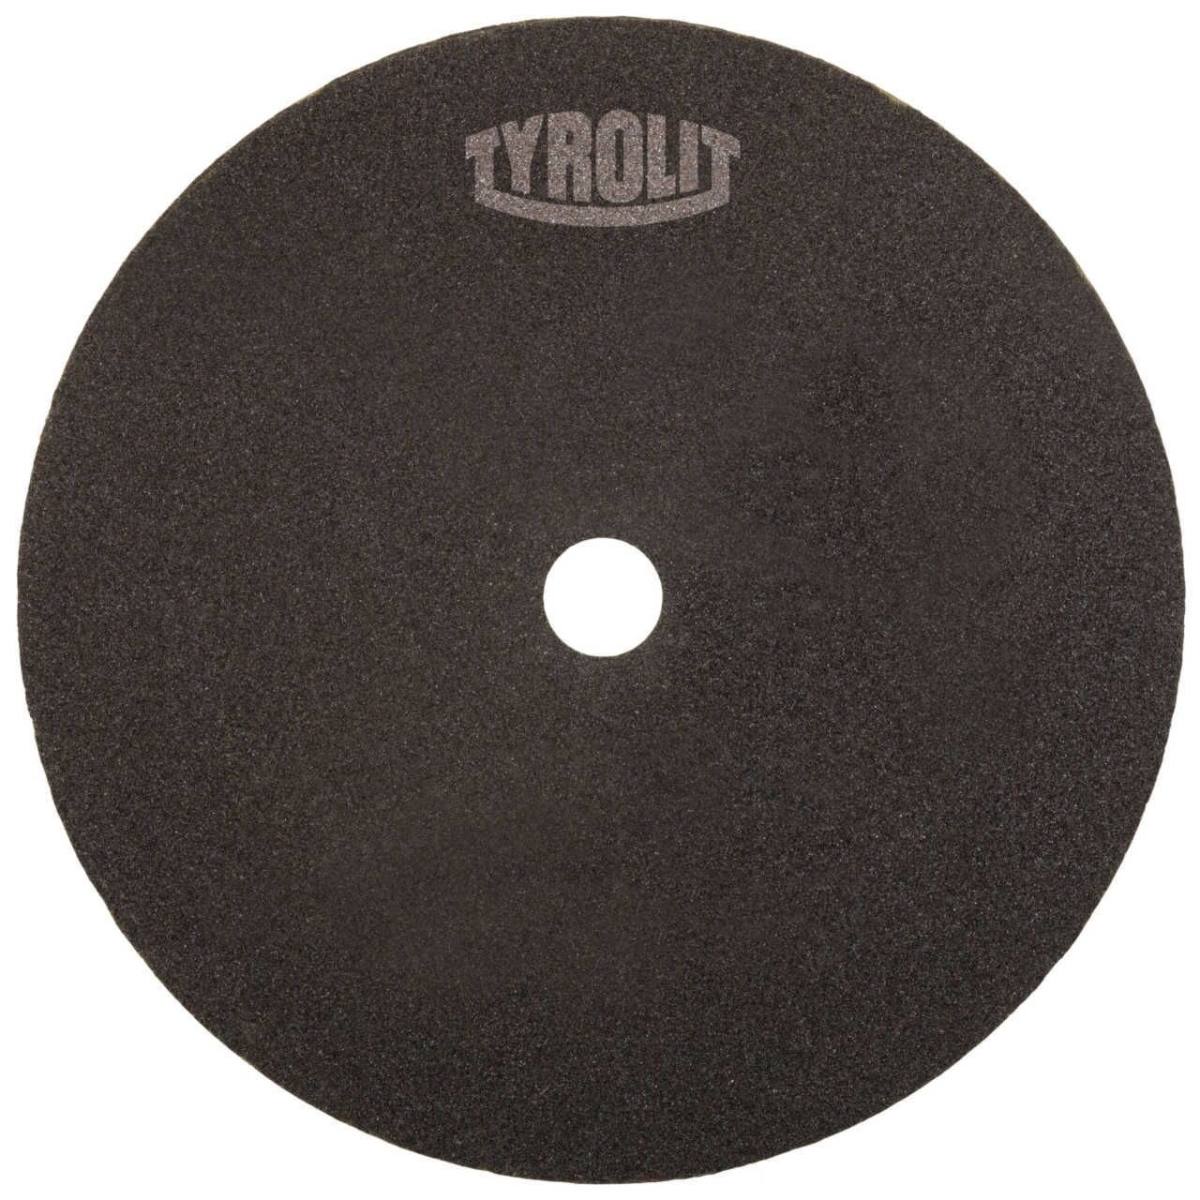 TYROLIT cut-off wheel for cutting and saw sharpening DxDxH 150x2x20 For steel and HSS, shape: 41N - straight version (non-woven cut-off wheel), Art. 32023